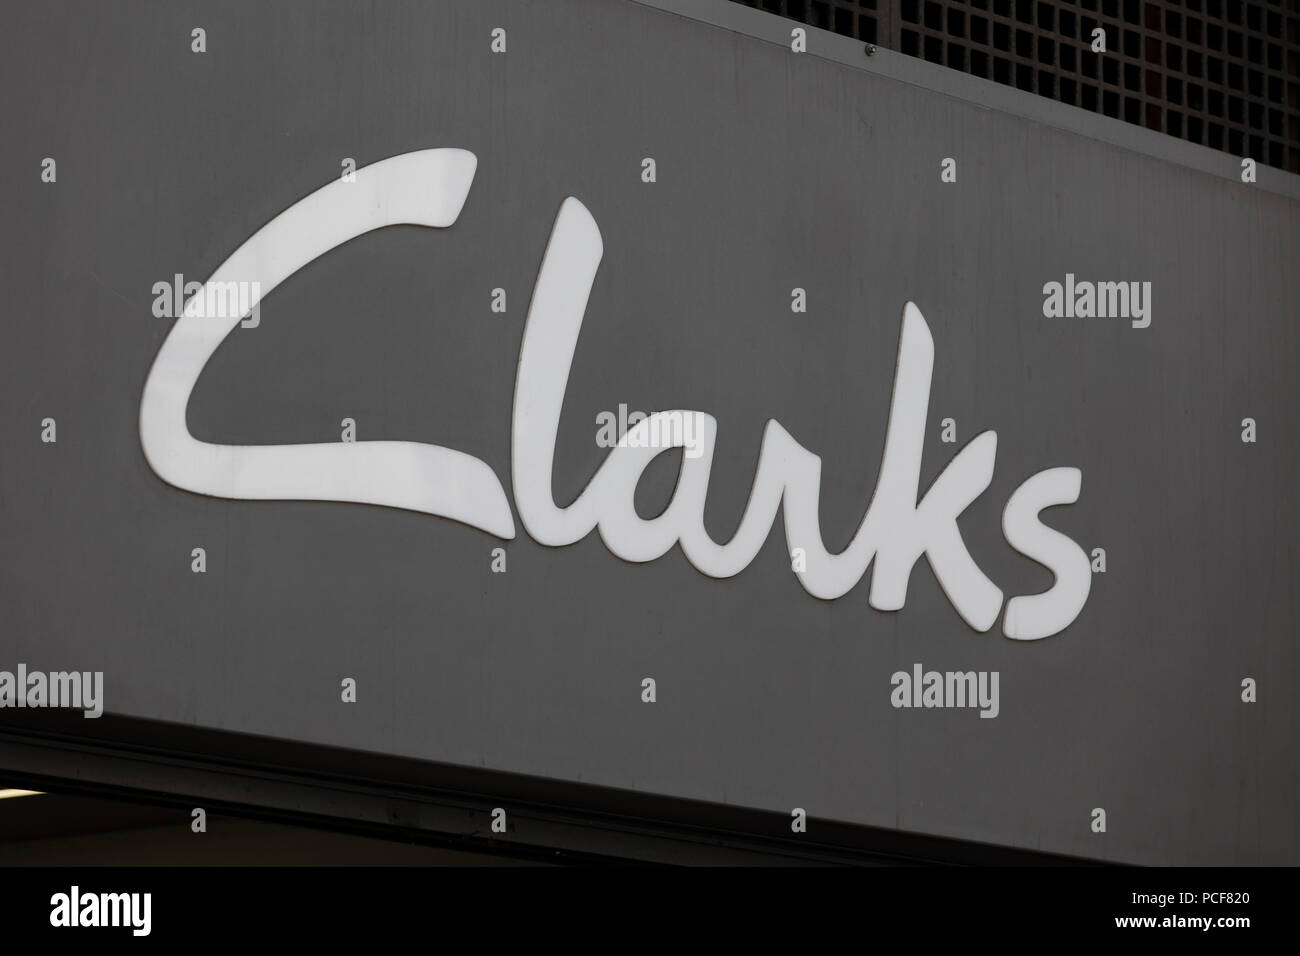 clarks shoes oxford street